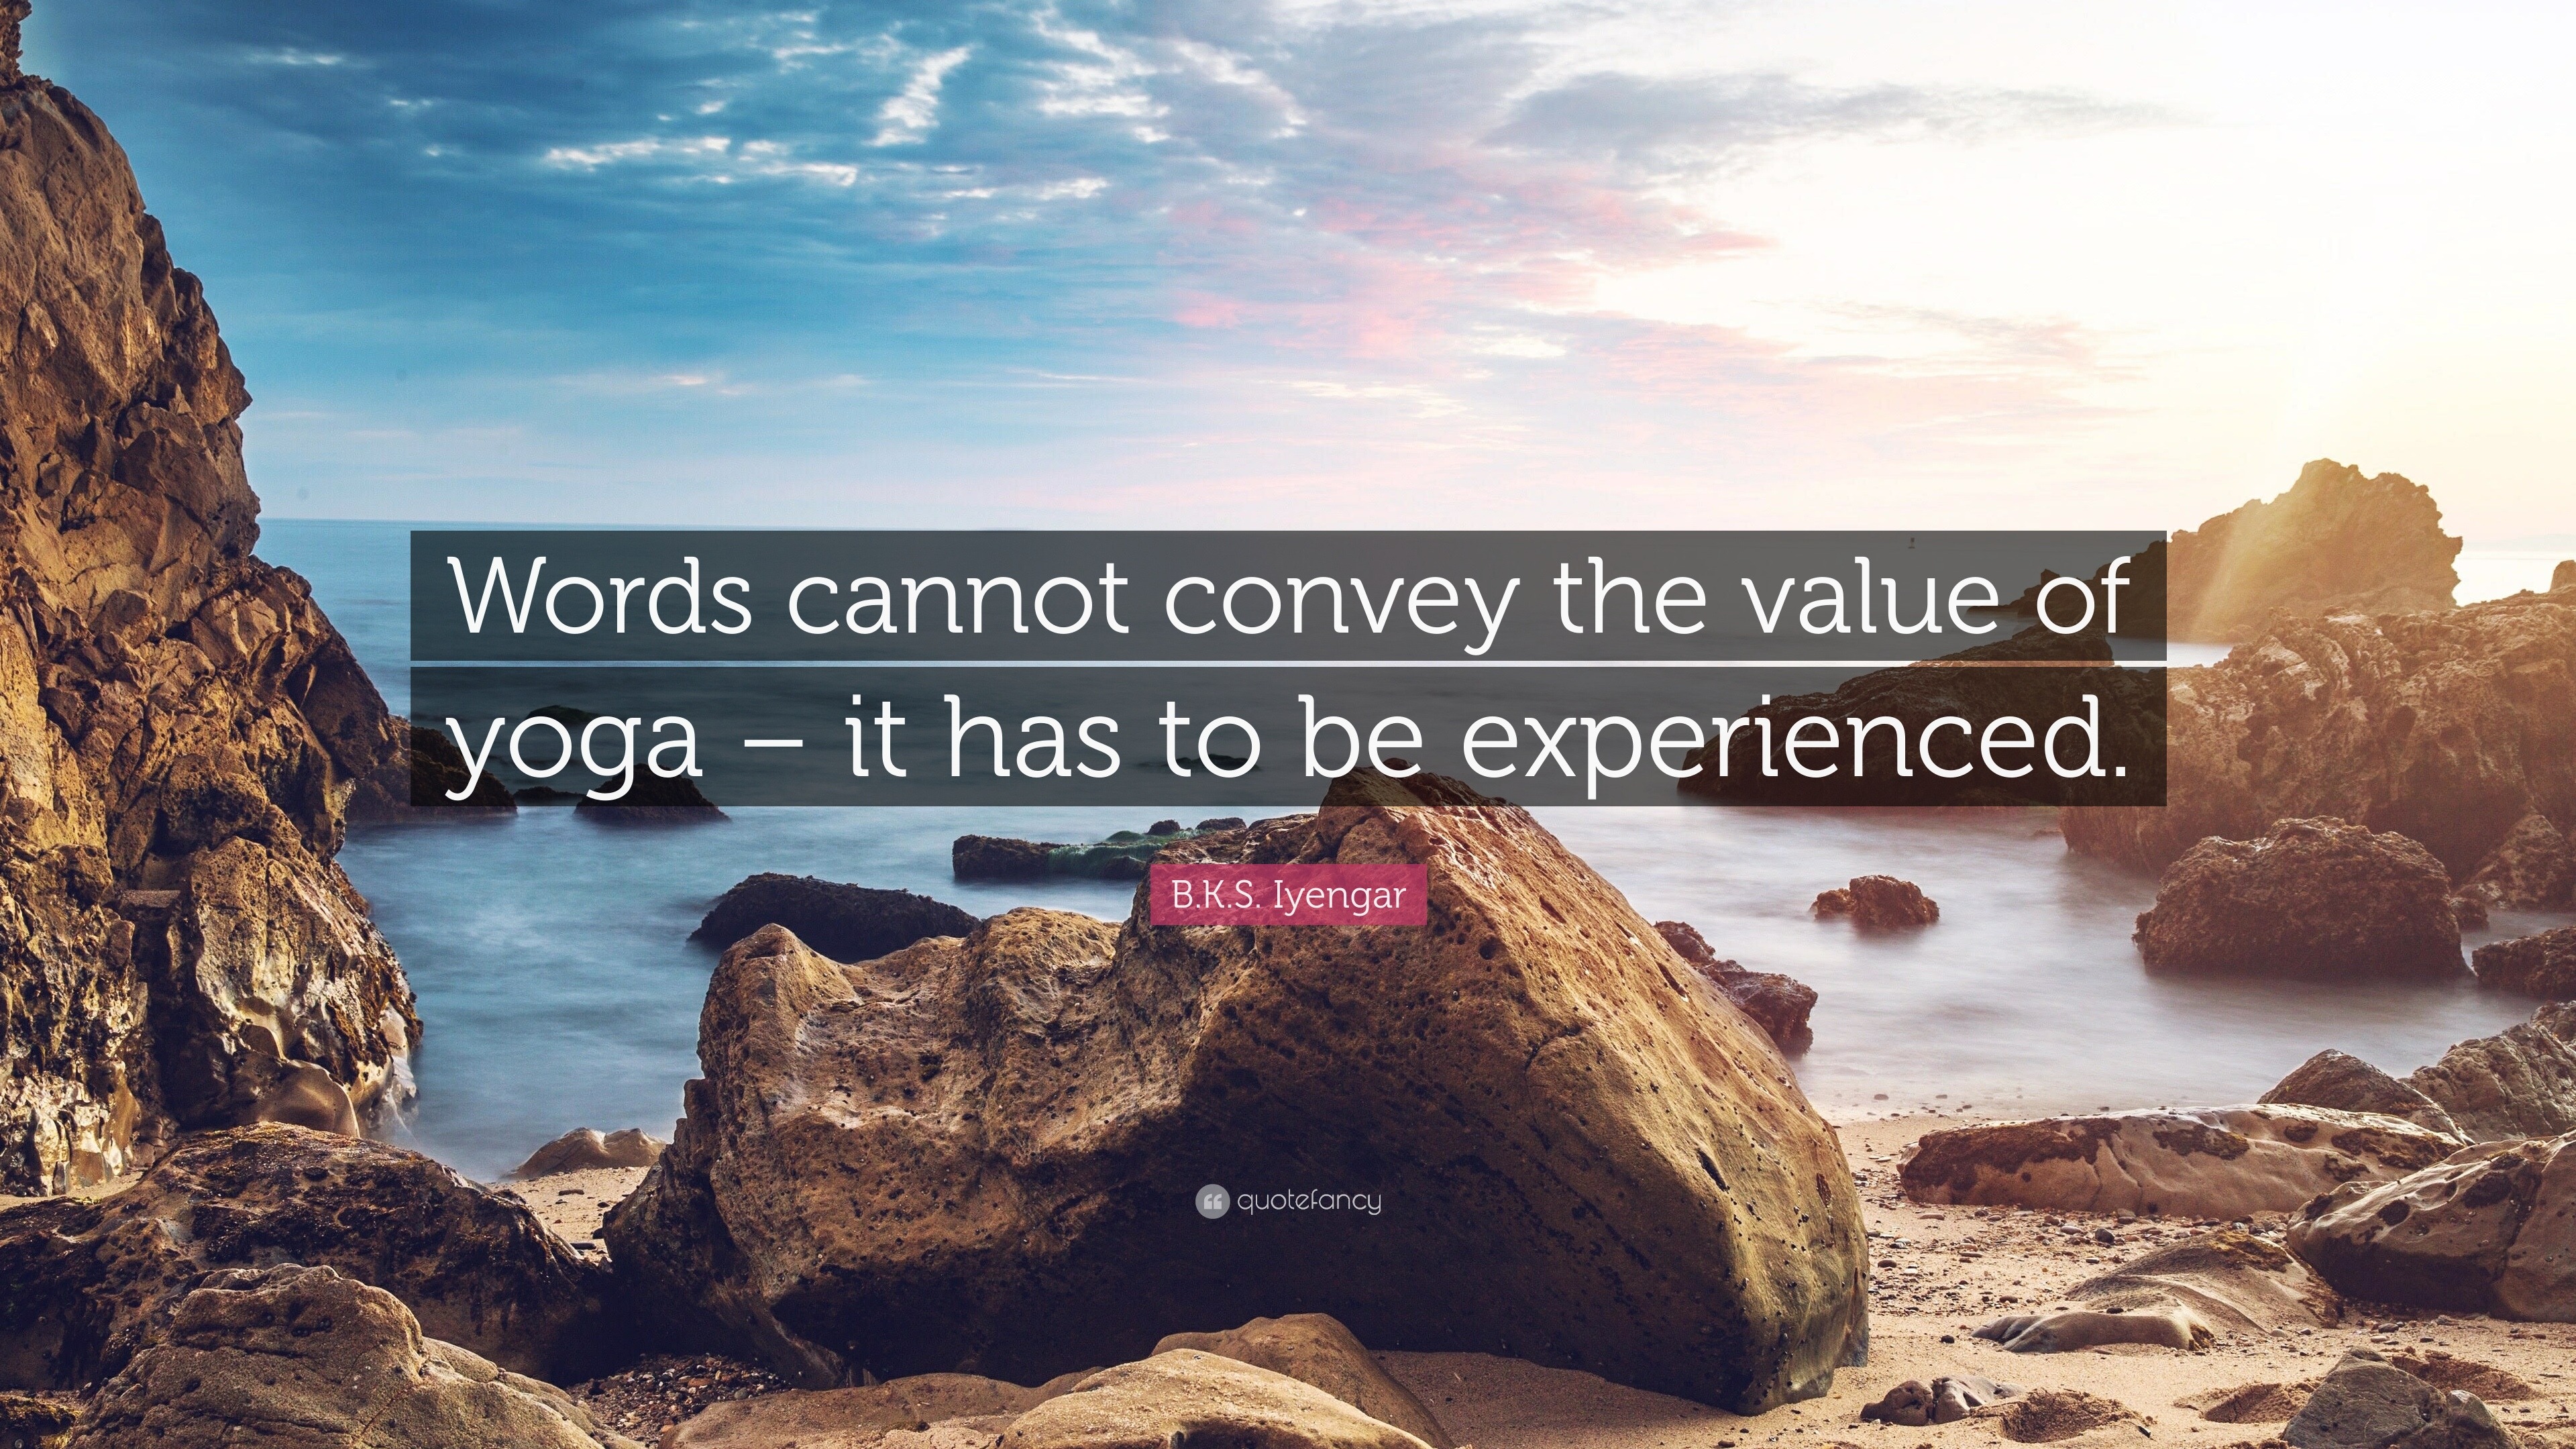 B.K.S. Iyengar Quote: “Words cannot convey the value of yoga – it